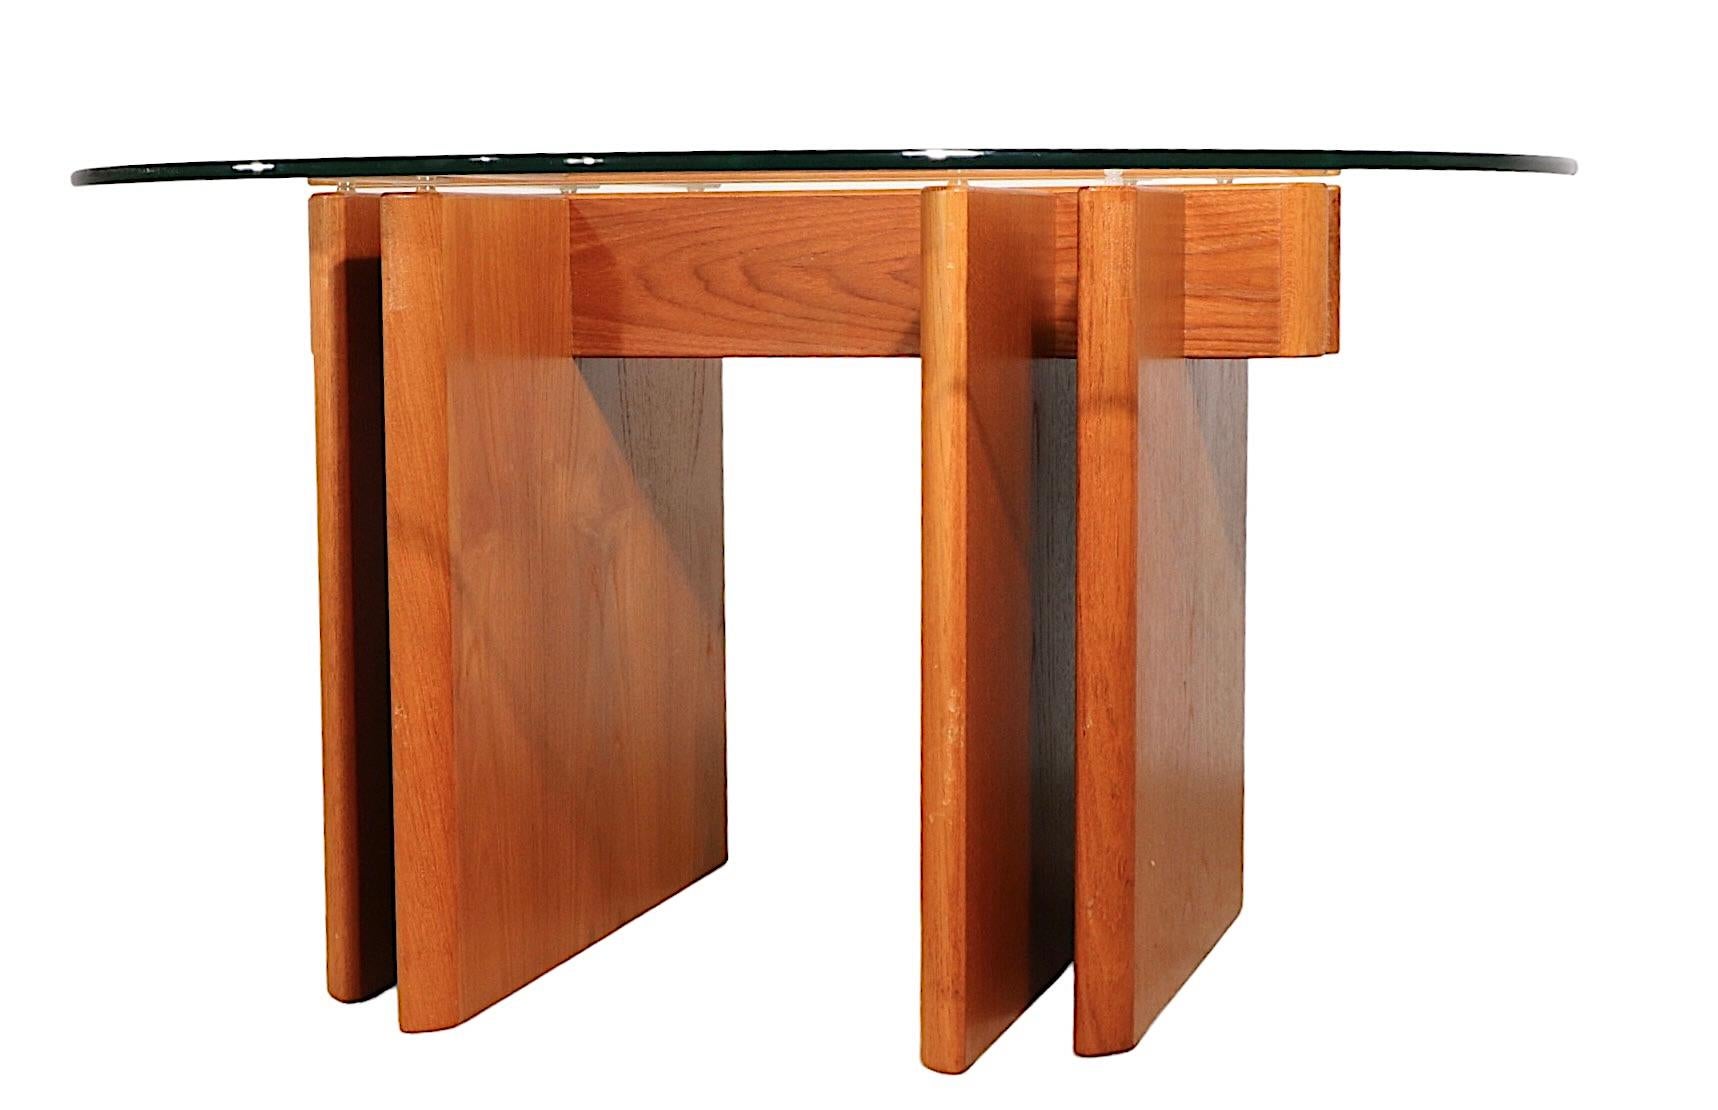 Stylish architectural mid-century Danish Modern coffee table designed by Gustav Gaarde, made in Denmark, by Trakanten circa 1960's. The table features its original thick plate glass top, ( .50 in. ) which is the less common circular shape, which